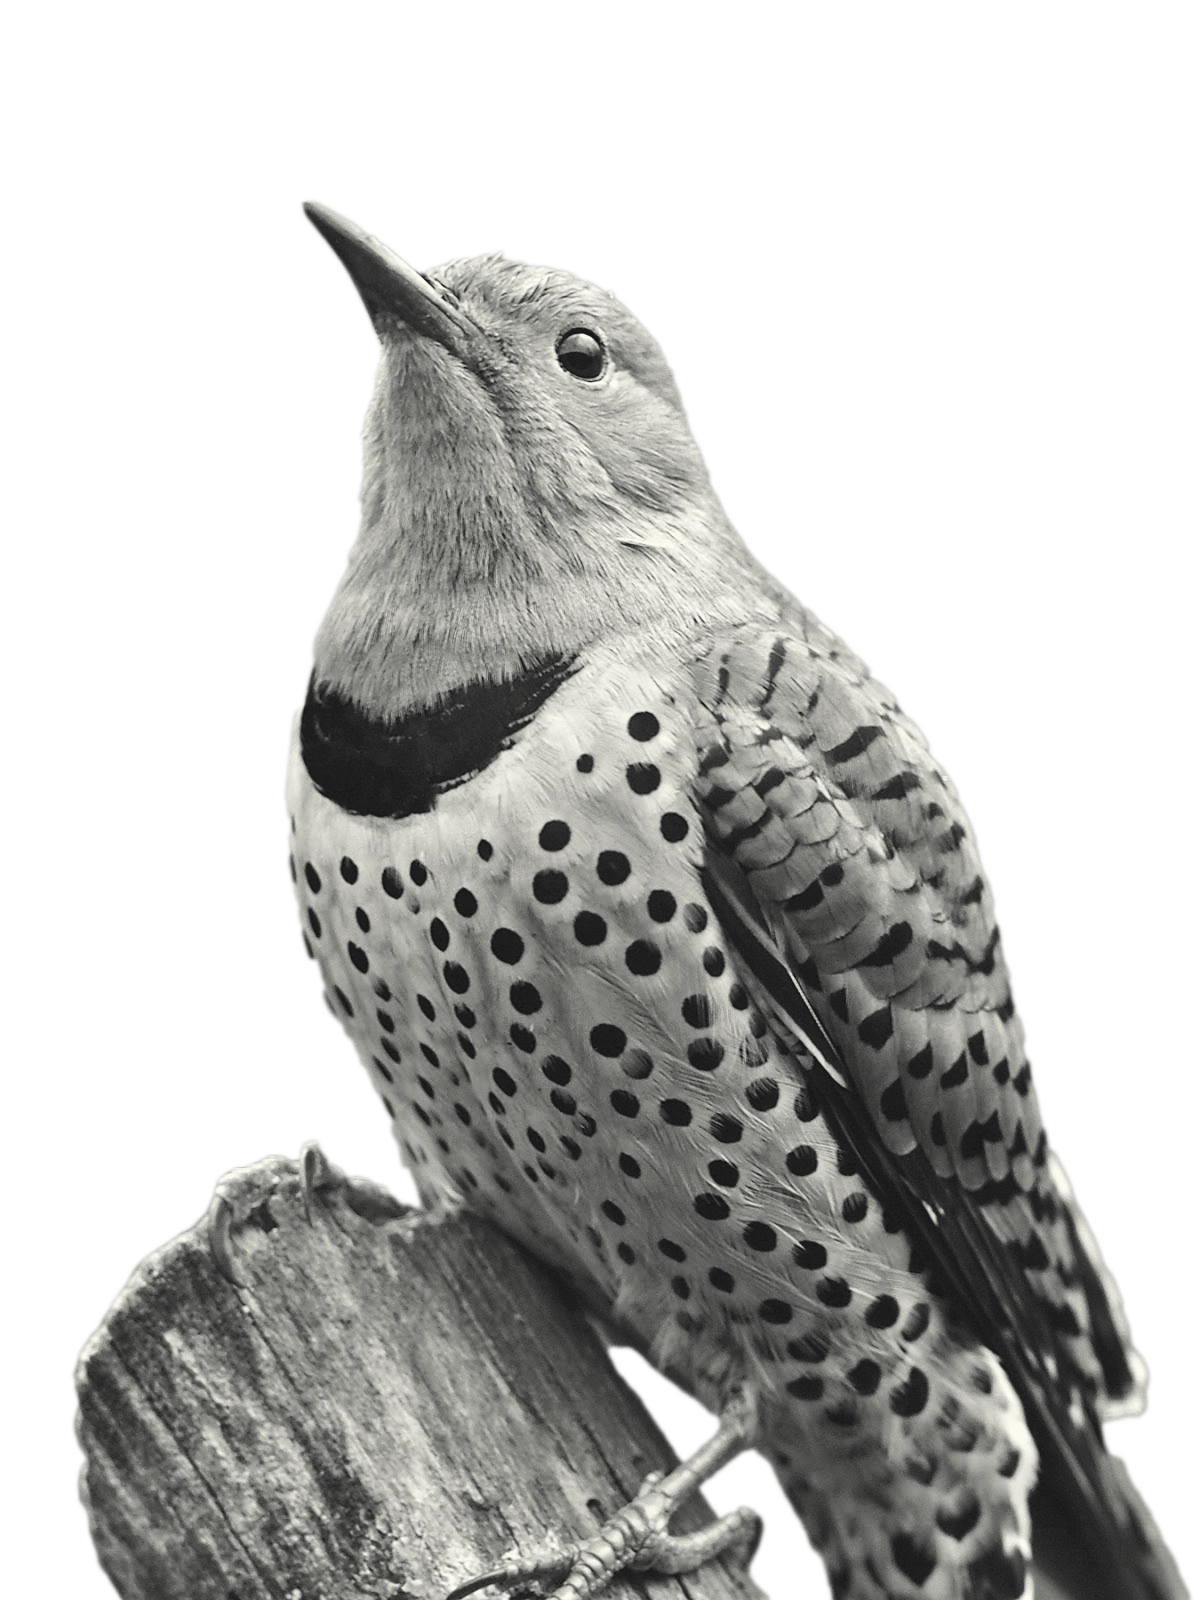 A close-up of a Northern Flicker woodpecker perched on a tree branch. This black-and-white image showcases the bird's intricate feather patterns, emphasizing ornithology and bird watching. It aligns with the naturalist spirit of BIRD CLUB and their commitment to being a sustainable brand, promoting eco-friendly birding practices.